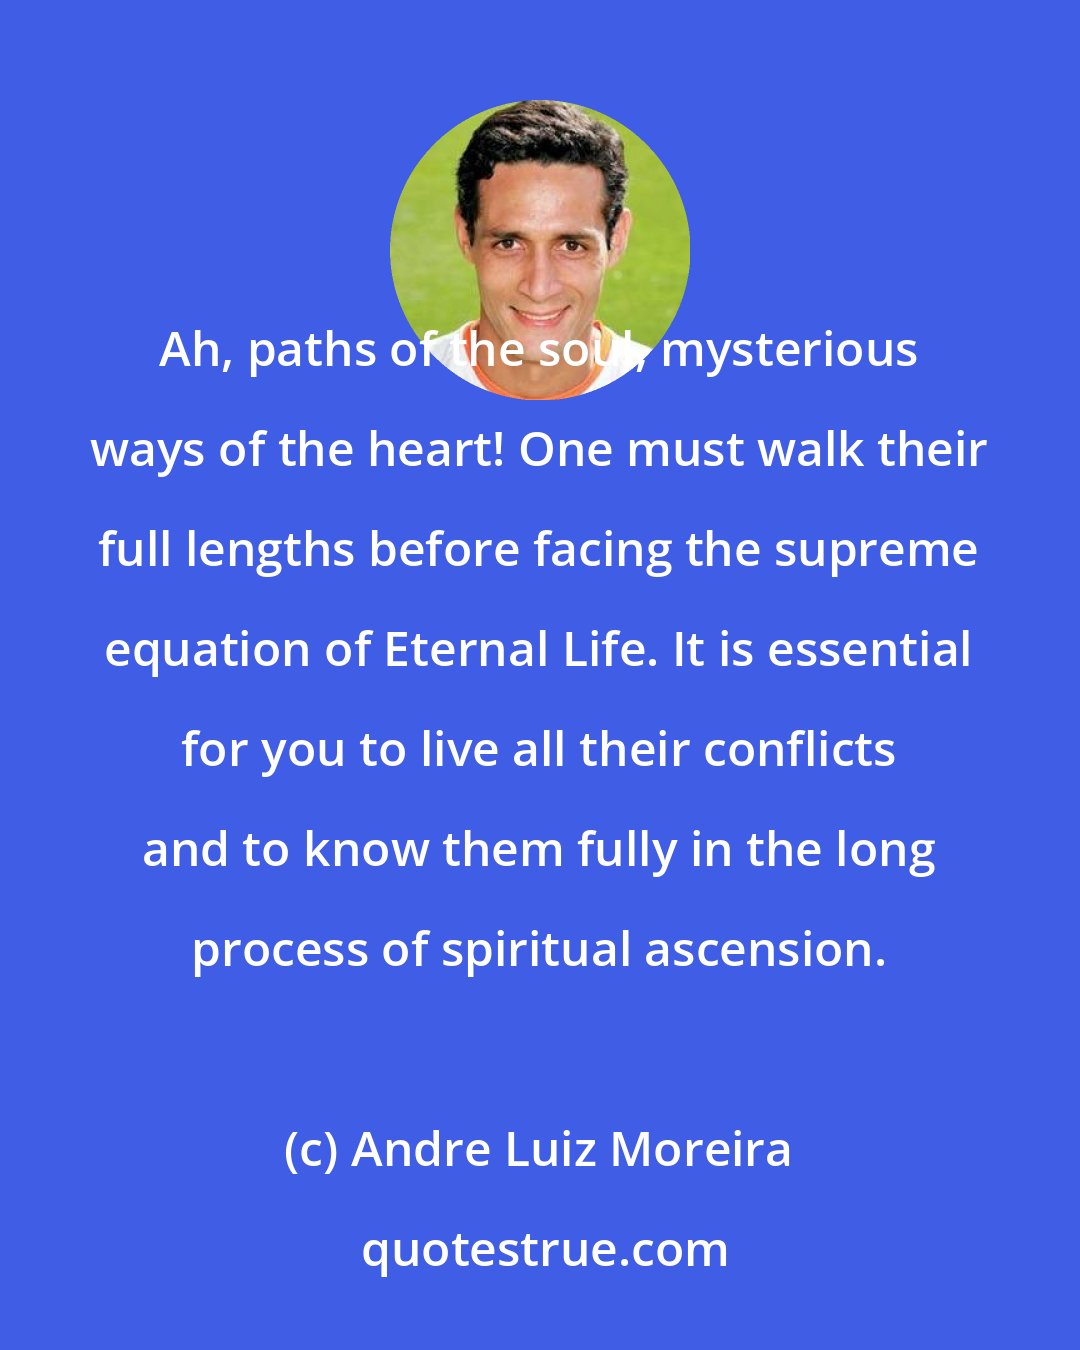 Andre Luiz Moreira: Ah, paths of the soul, mysterious ways of the heart! One must walk their full lengths before facing the supreme equation of Eternal Life. It is essential for you to live all their conflicts and to know them fully in the long process of spiritual ascension.